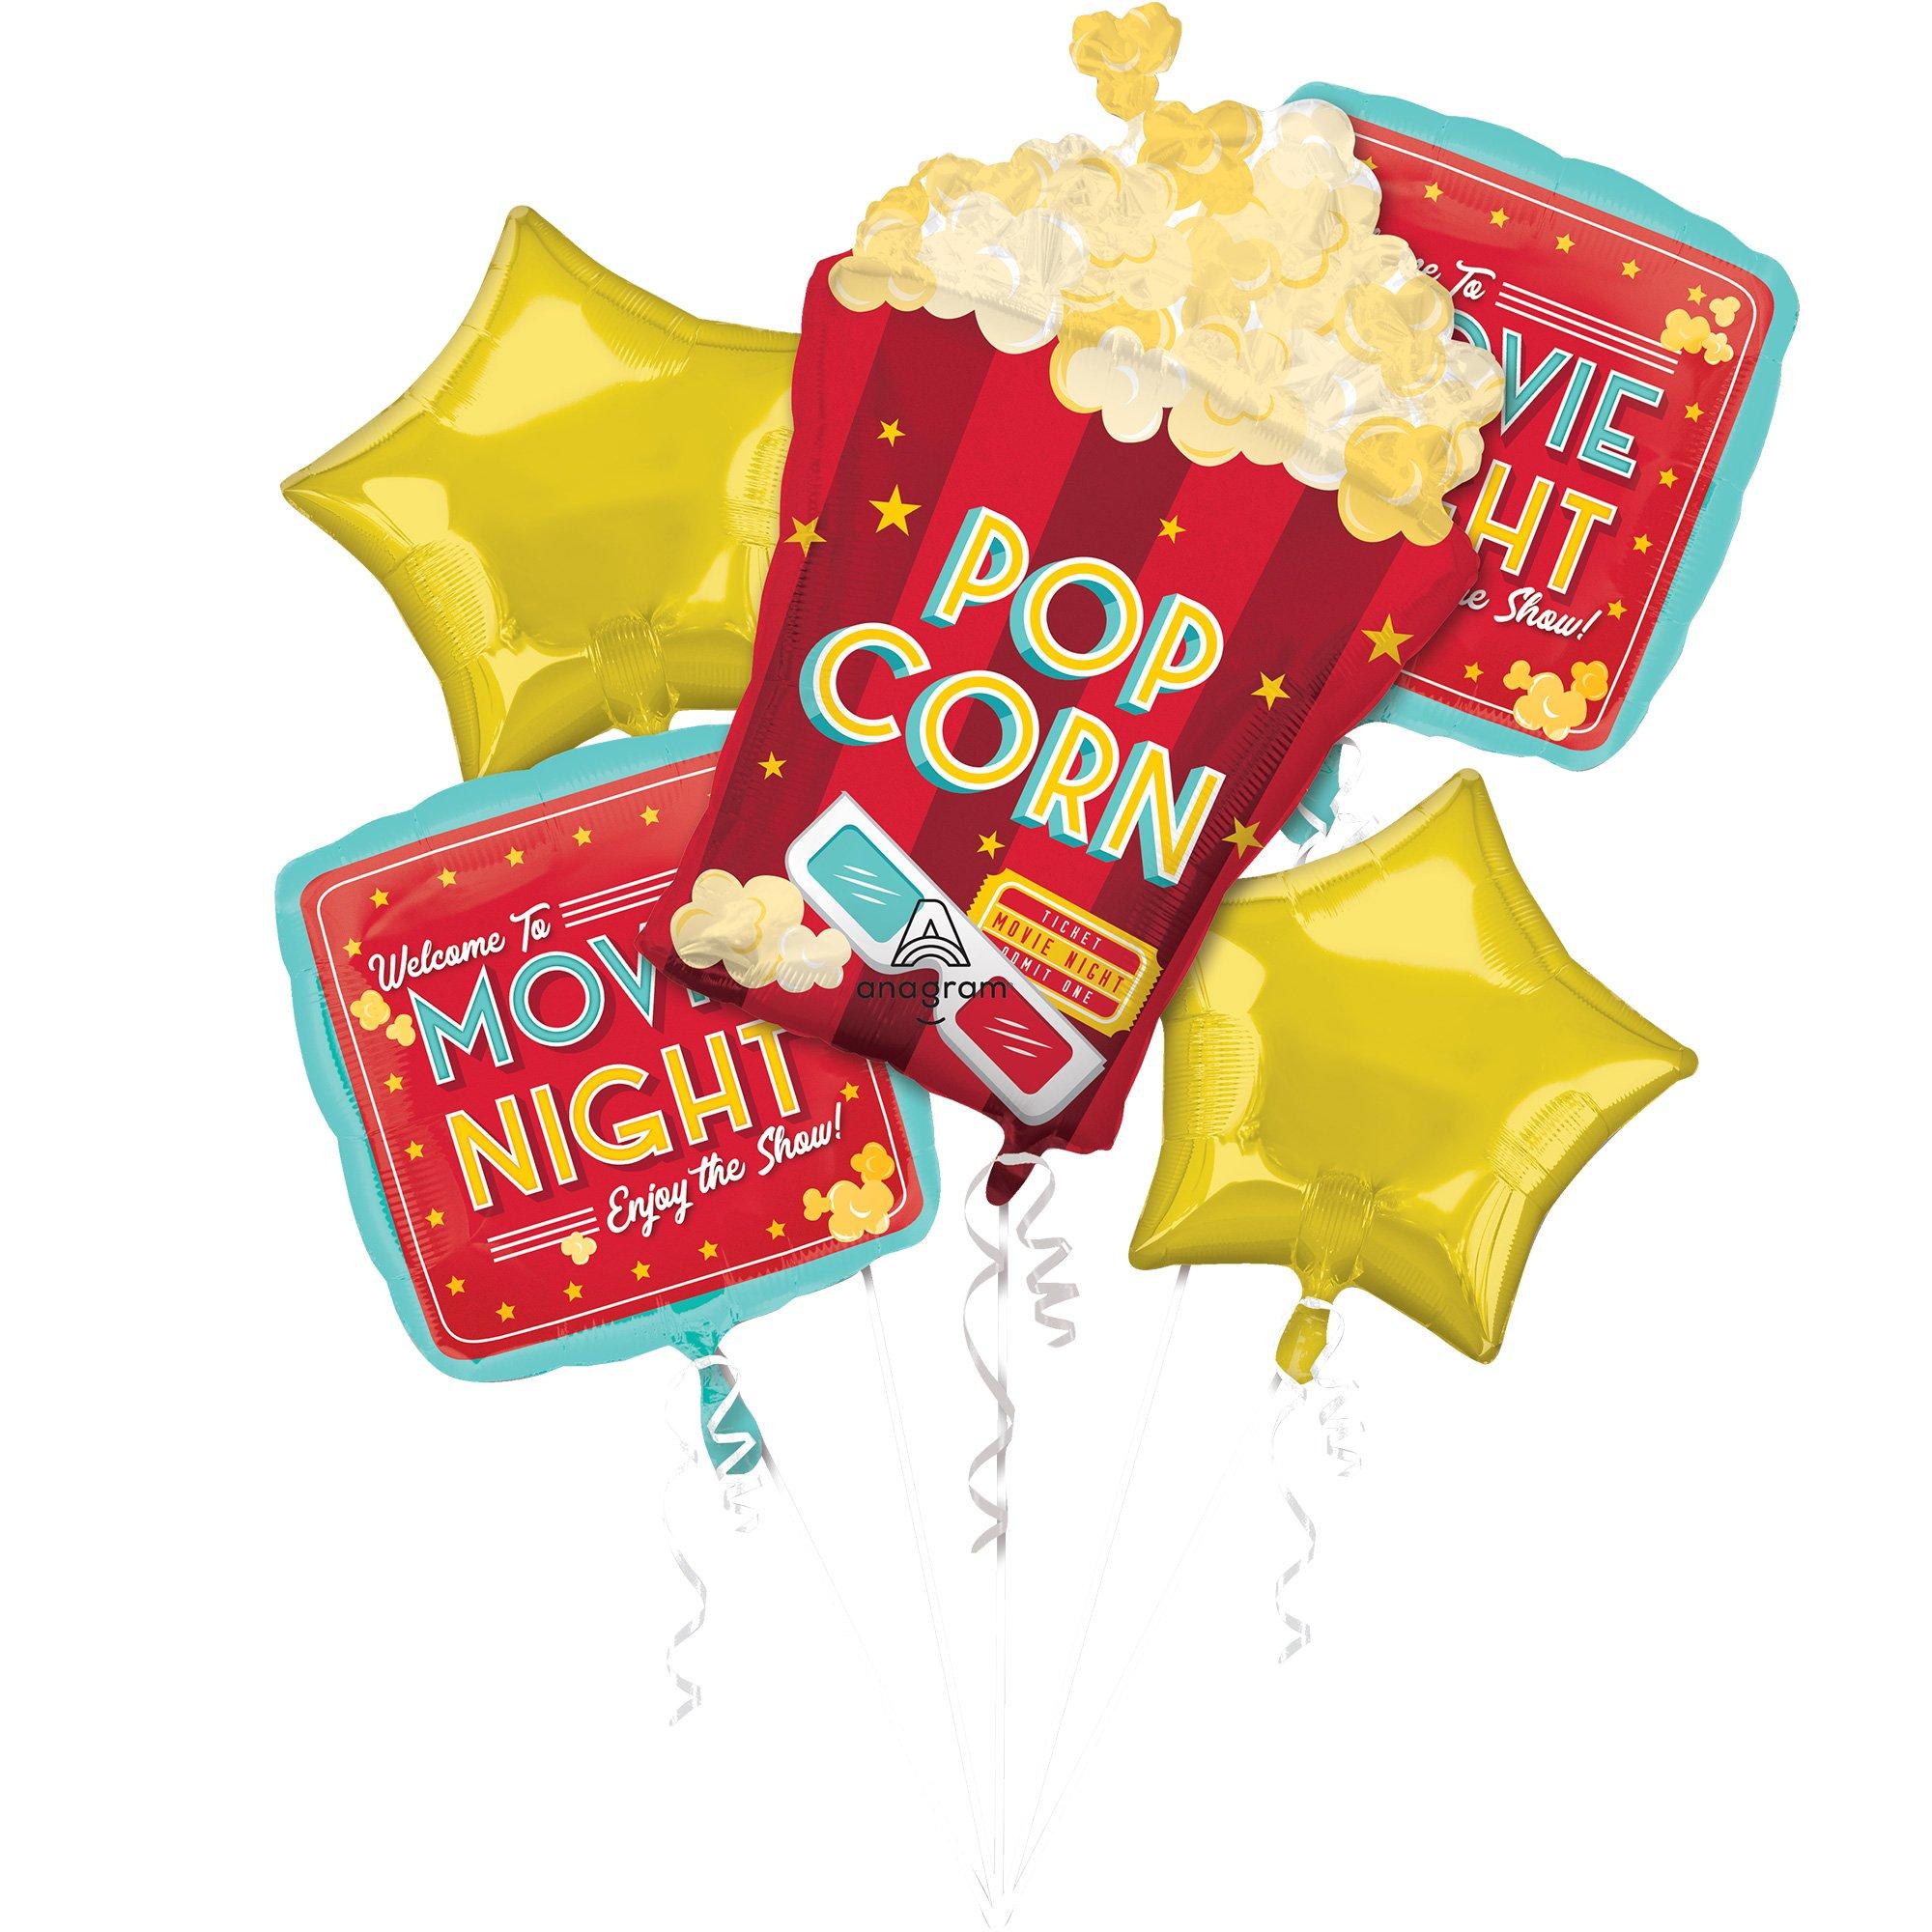 Movie Night Party Supplies Balloon Bouquet Decorations Hollywood